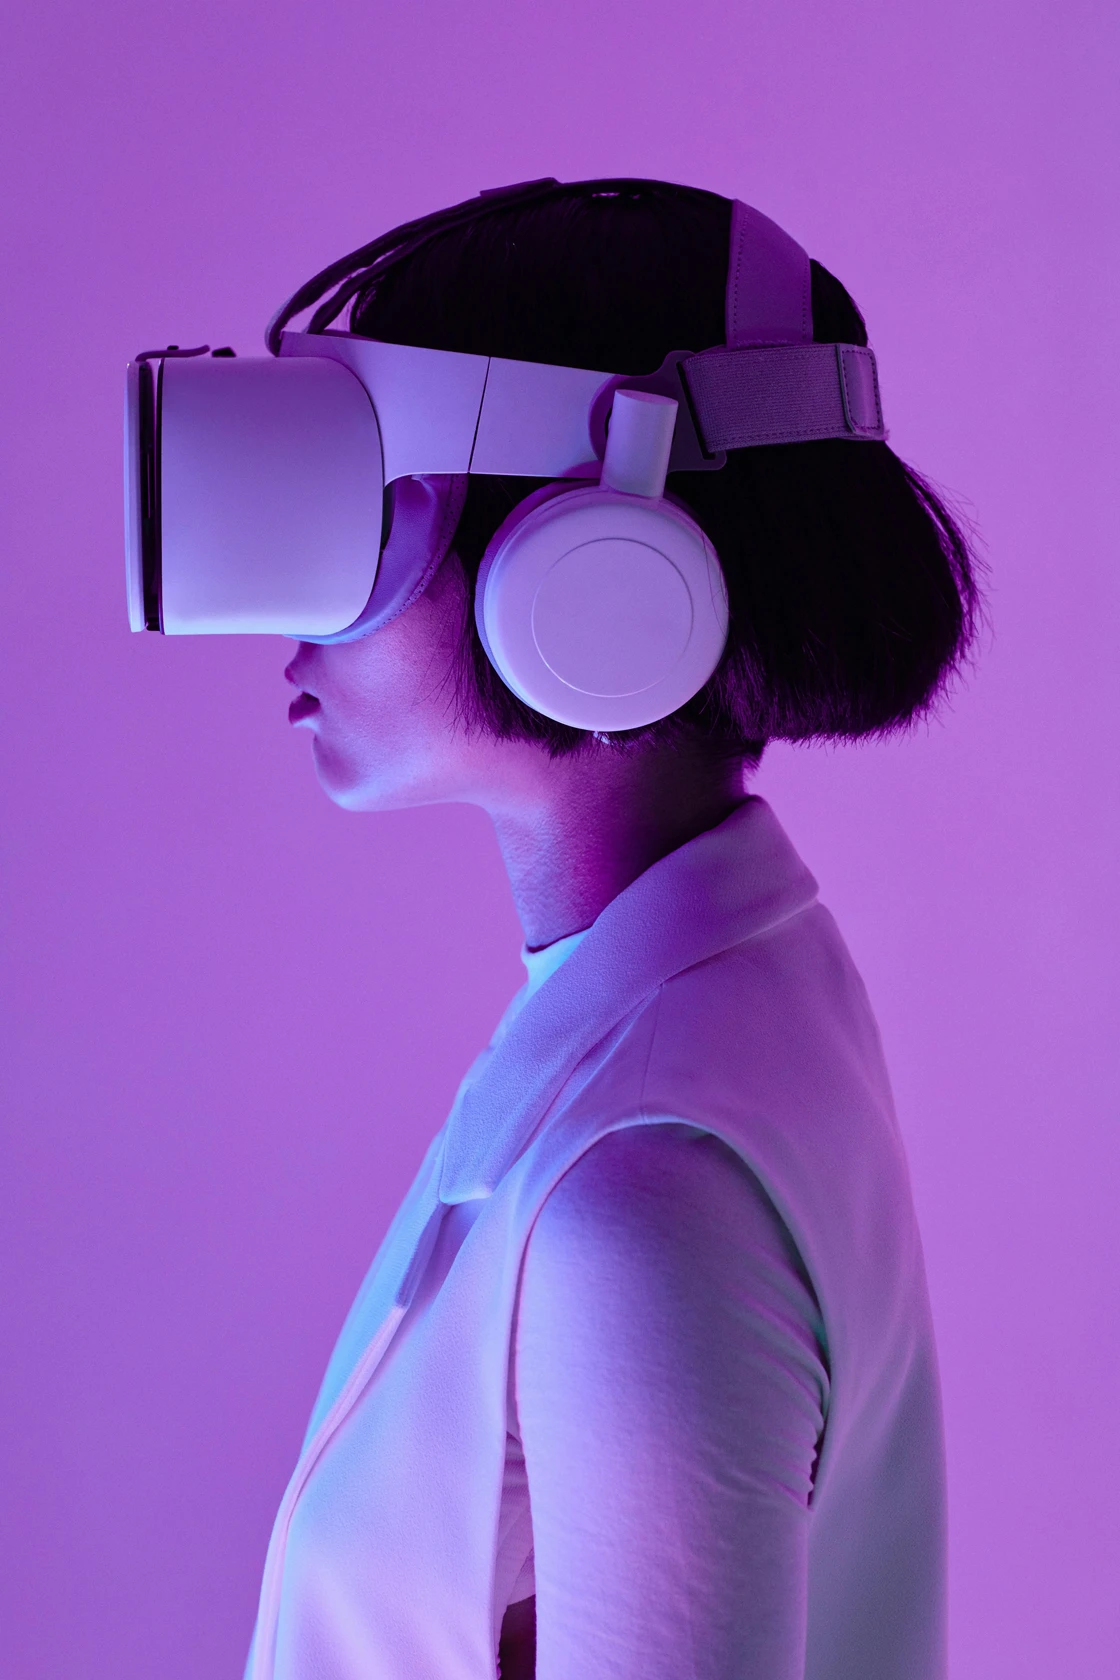 A woman using VR glasses